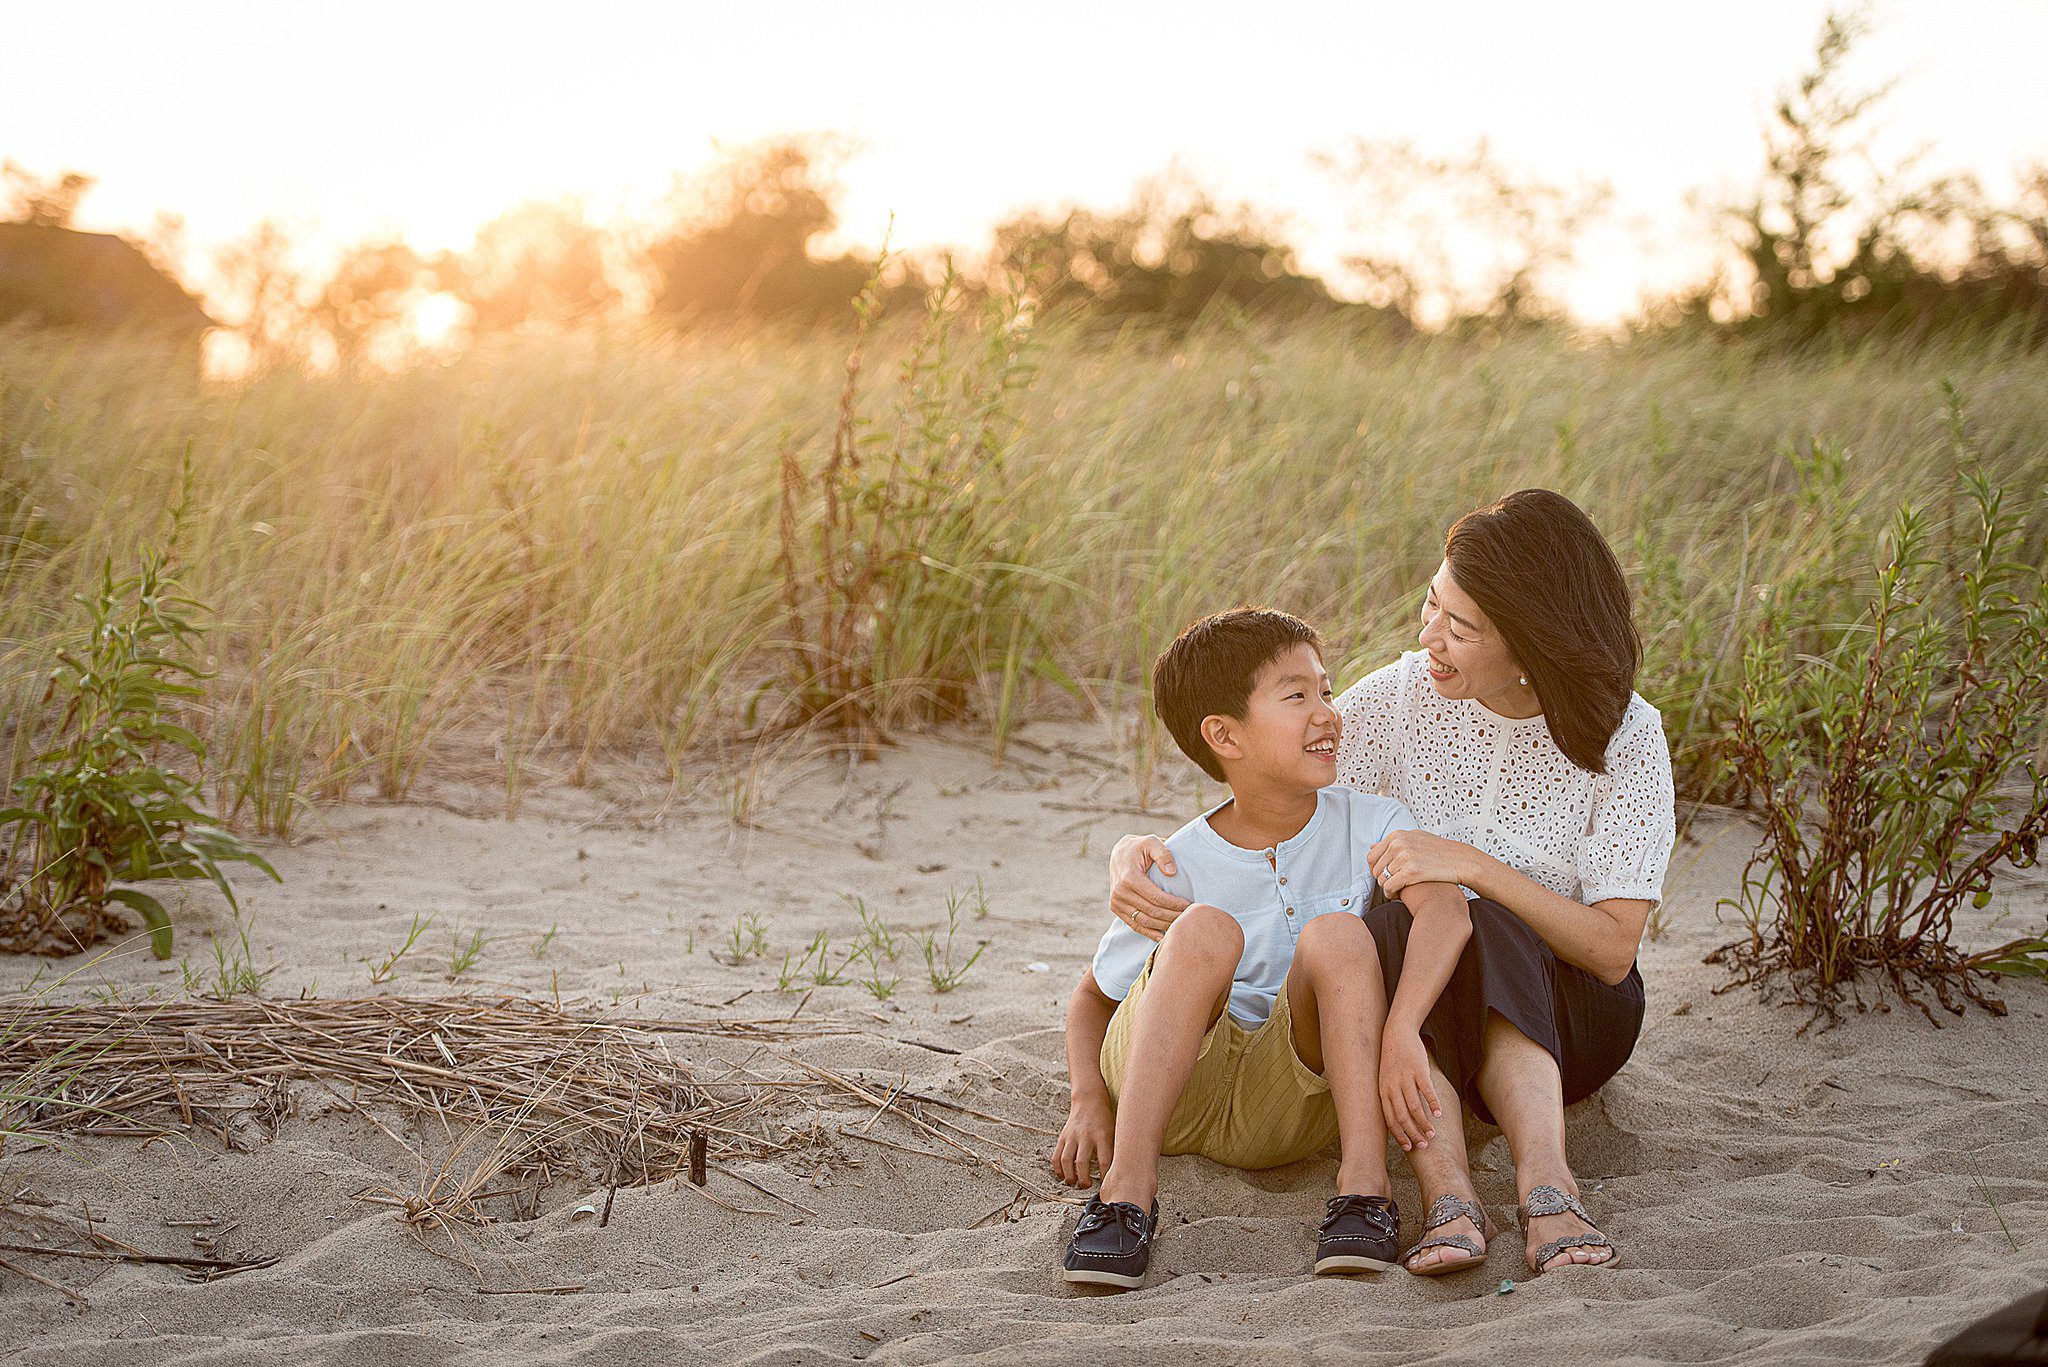 A mother in a white top sits in the sand on a beach with her young son at sunset